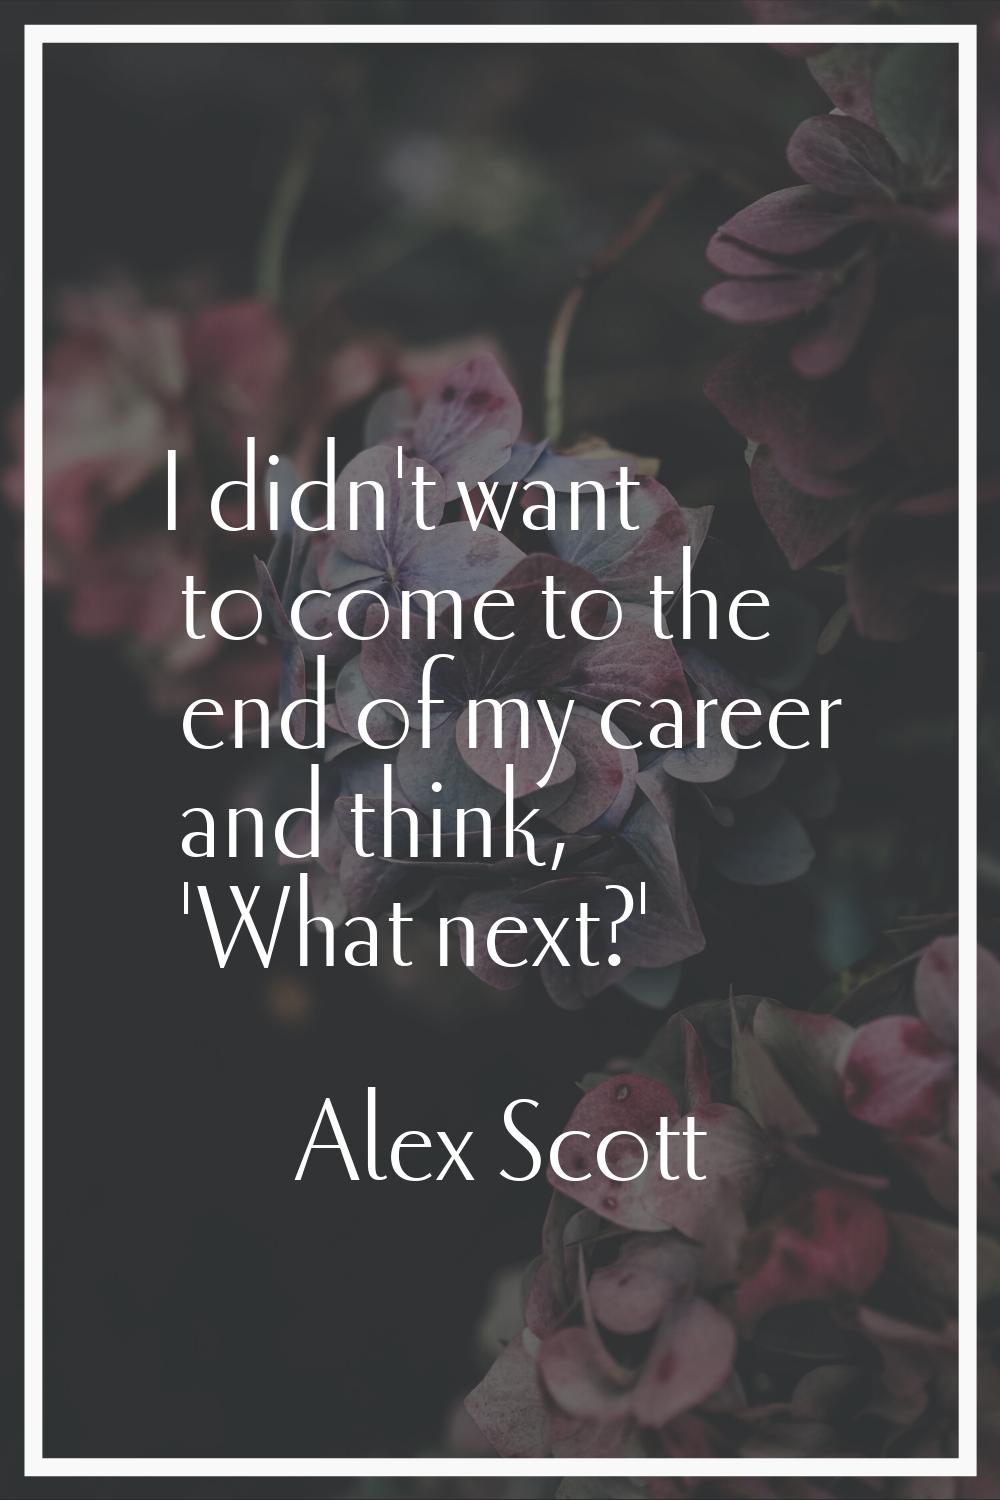 I didn't want to come to the end of my career and think, 'What next?'